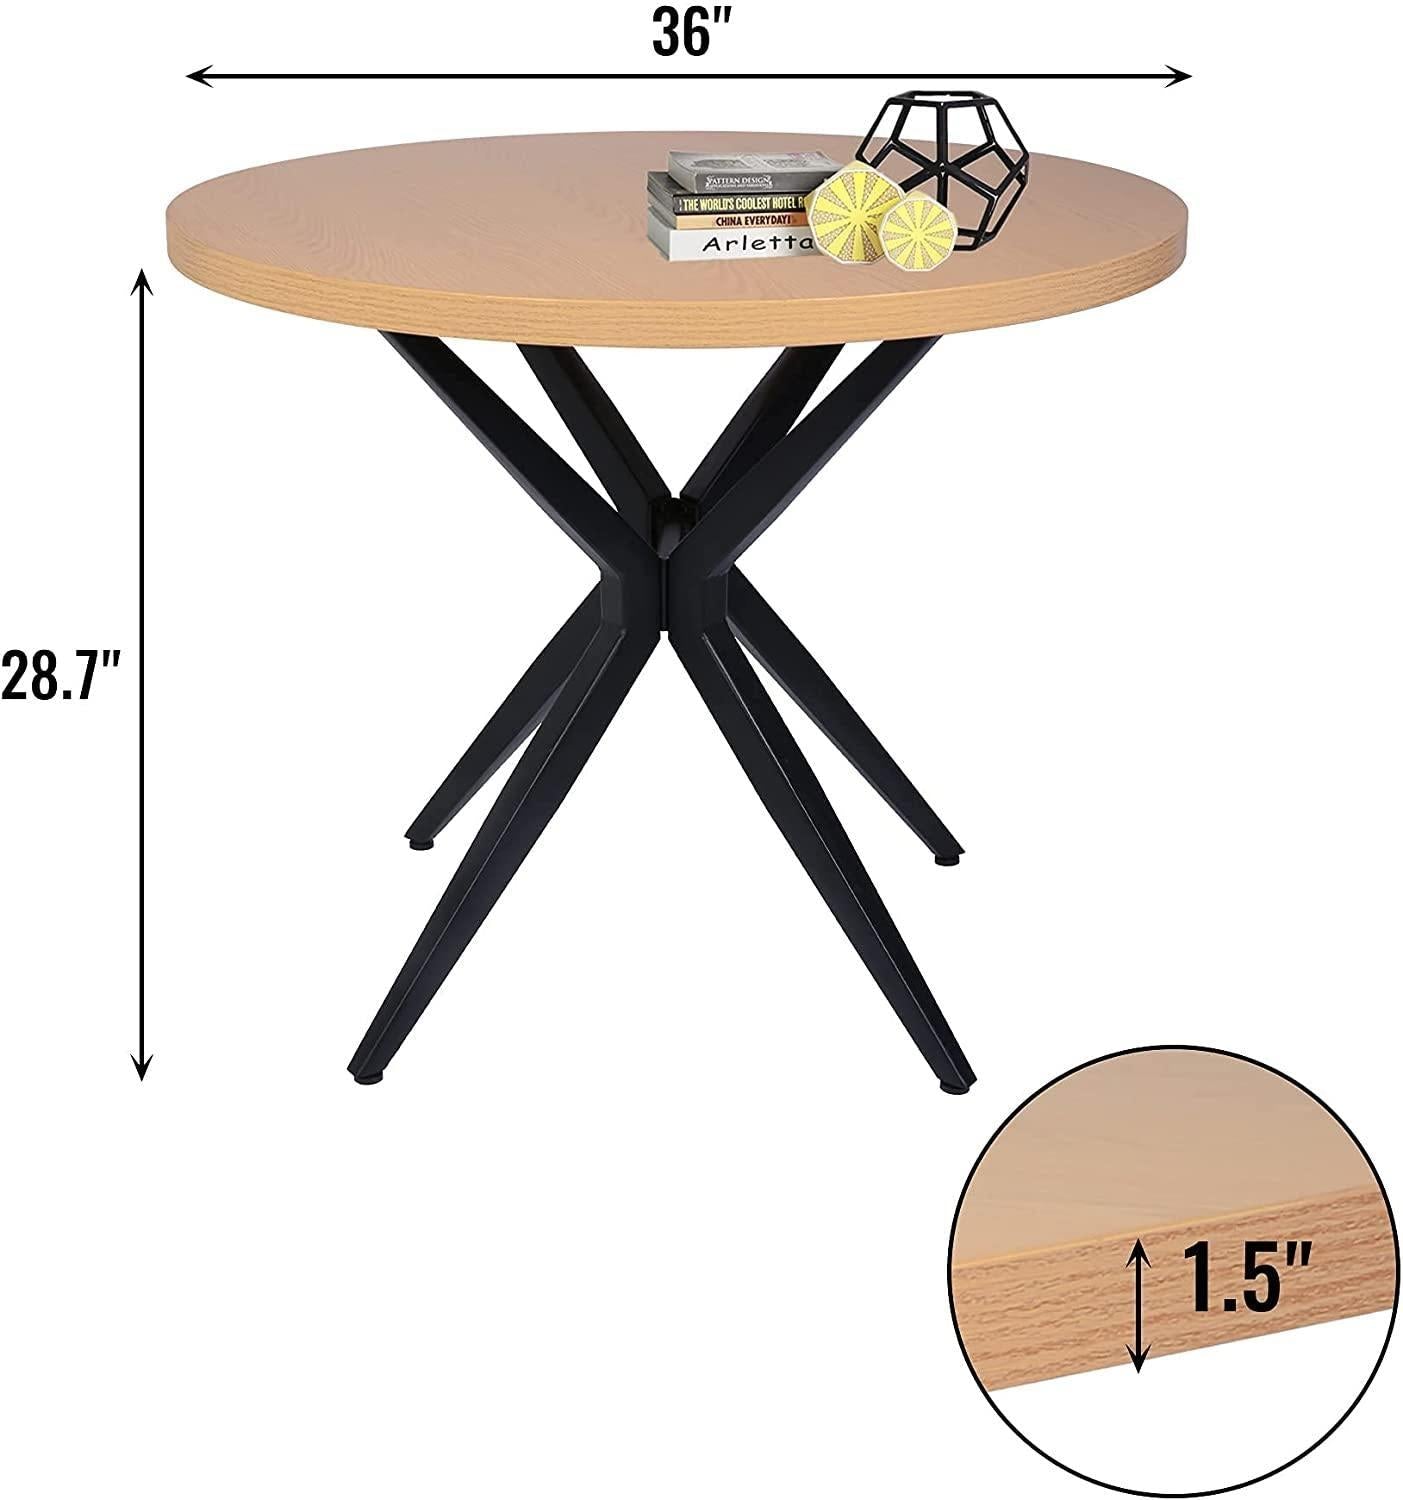 36" Round Mid-Century Dining Table with Metal Legs